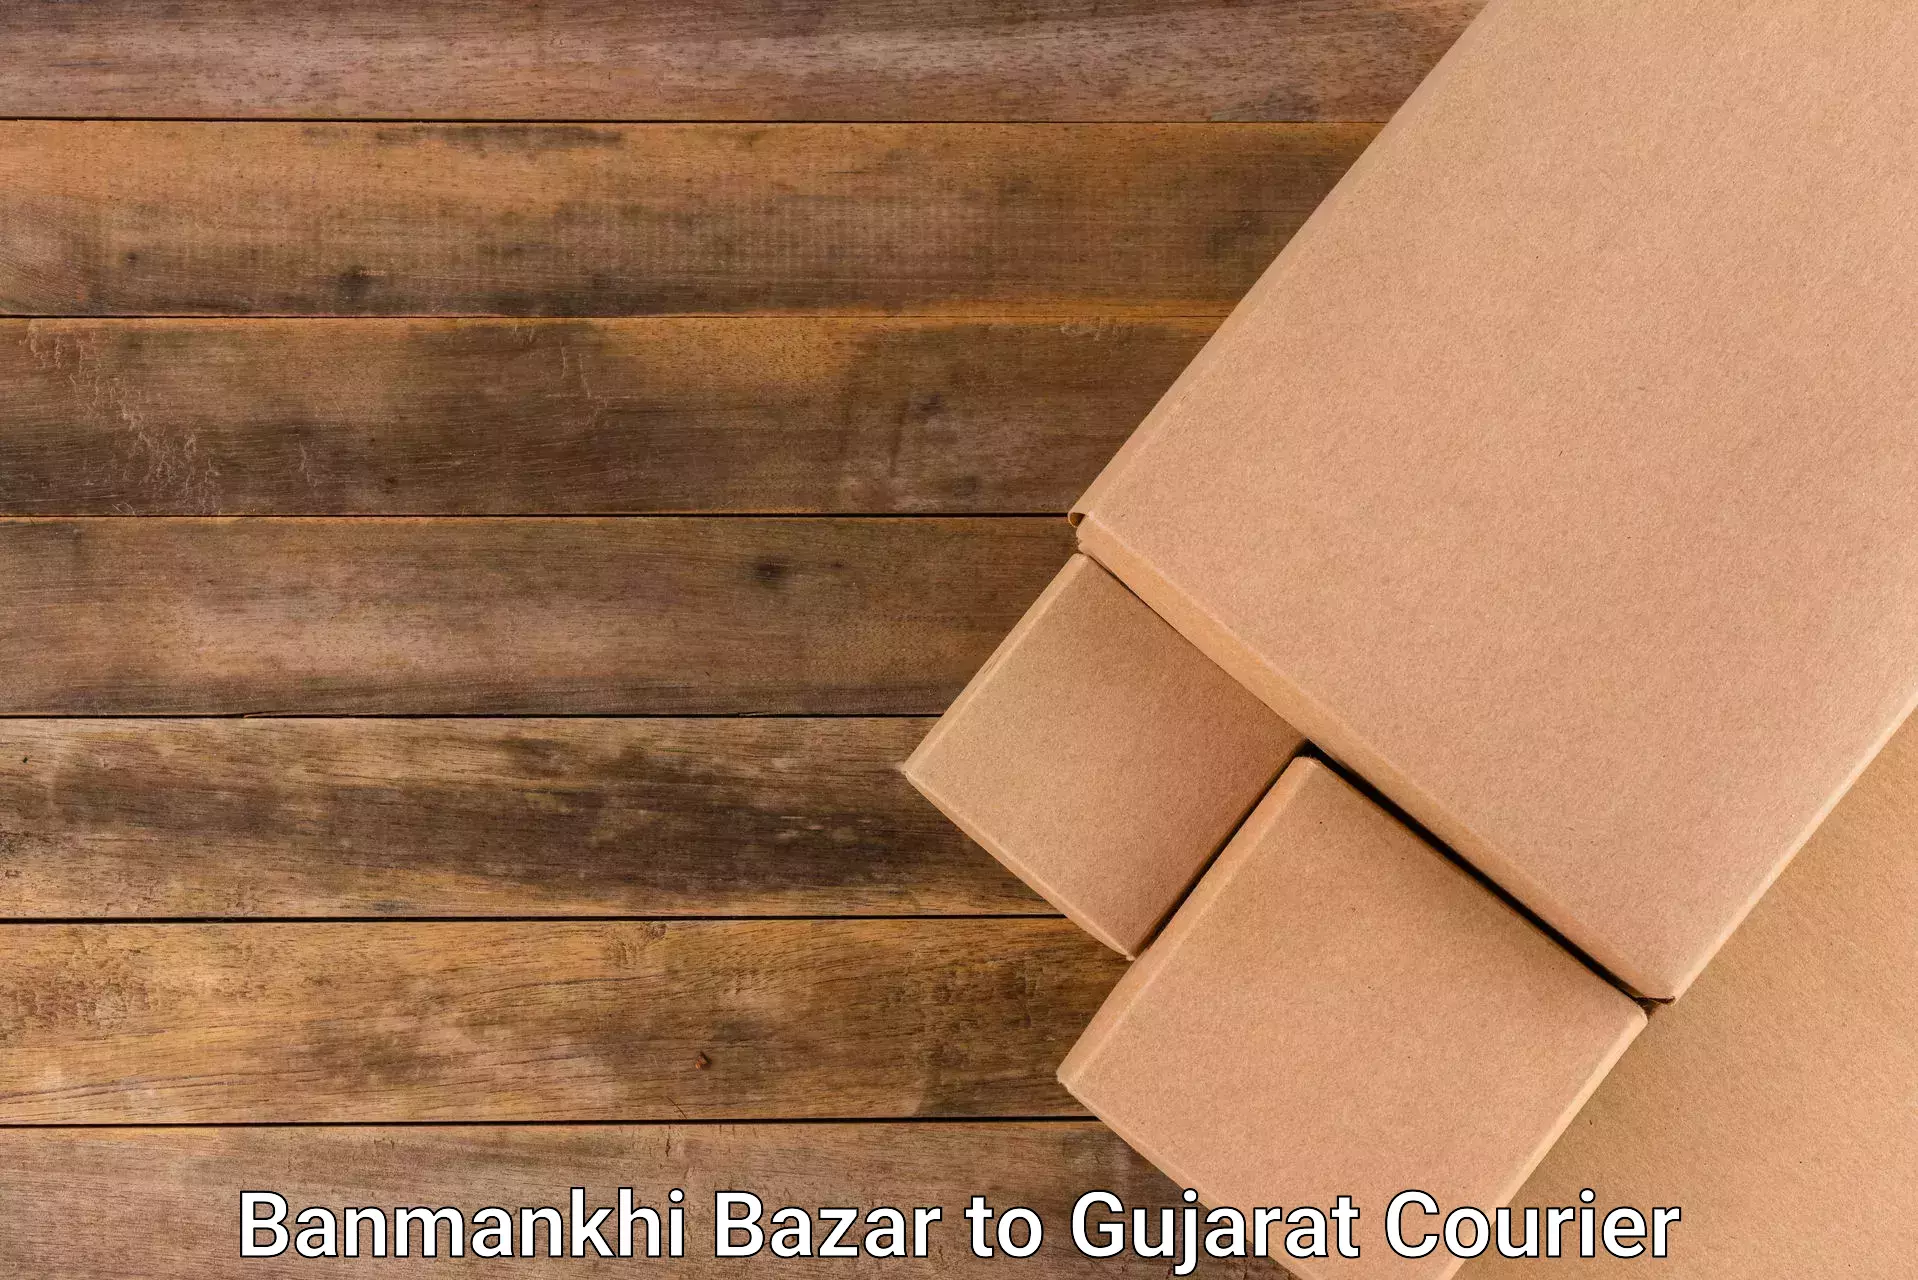 Quality courier partnerships Banmankhi Bazar to Jetpur